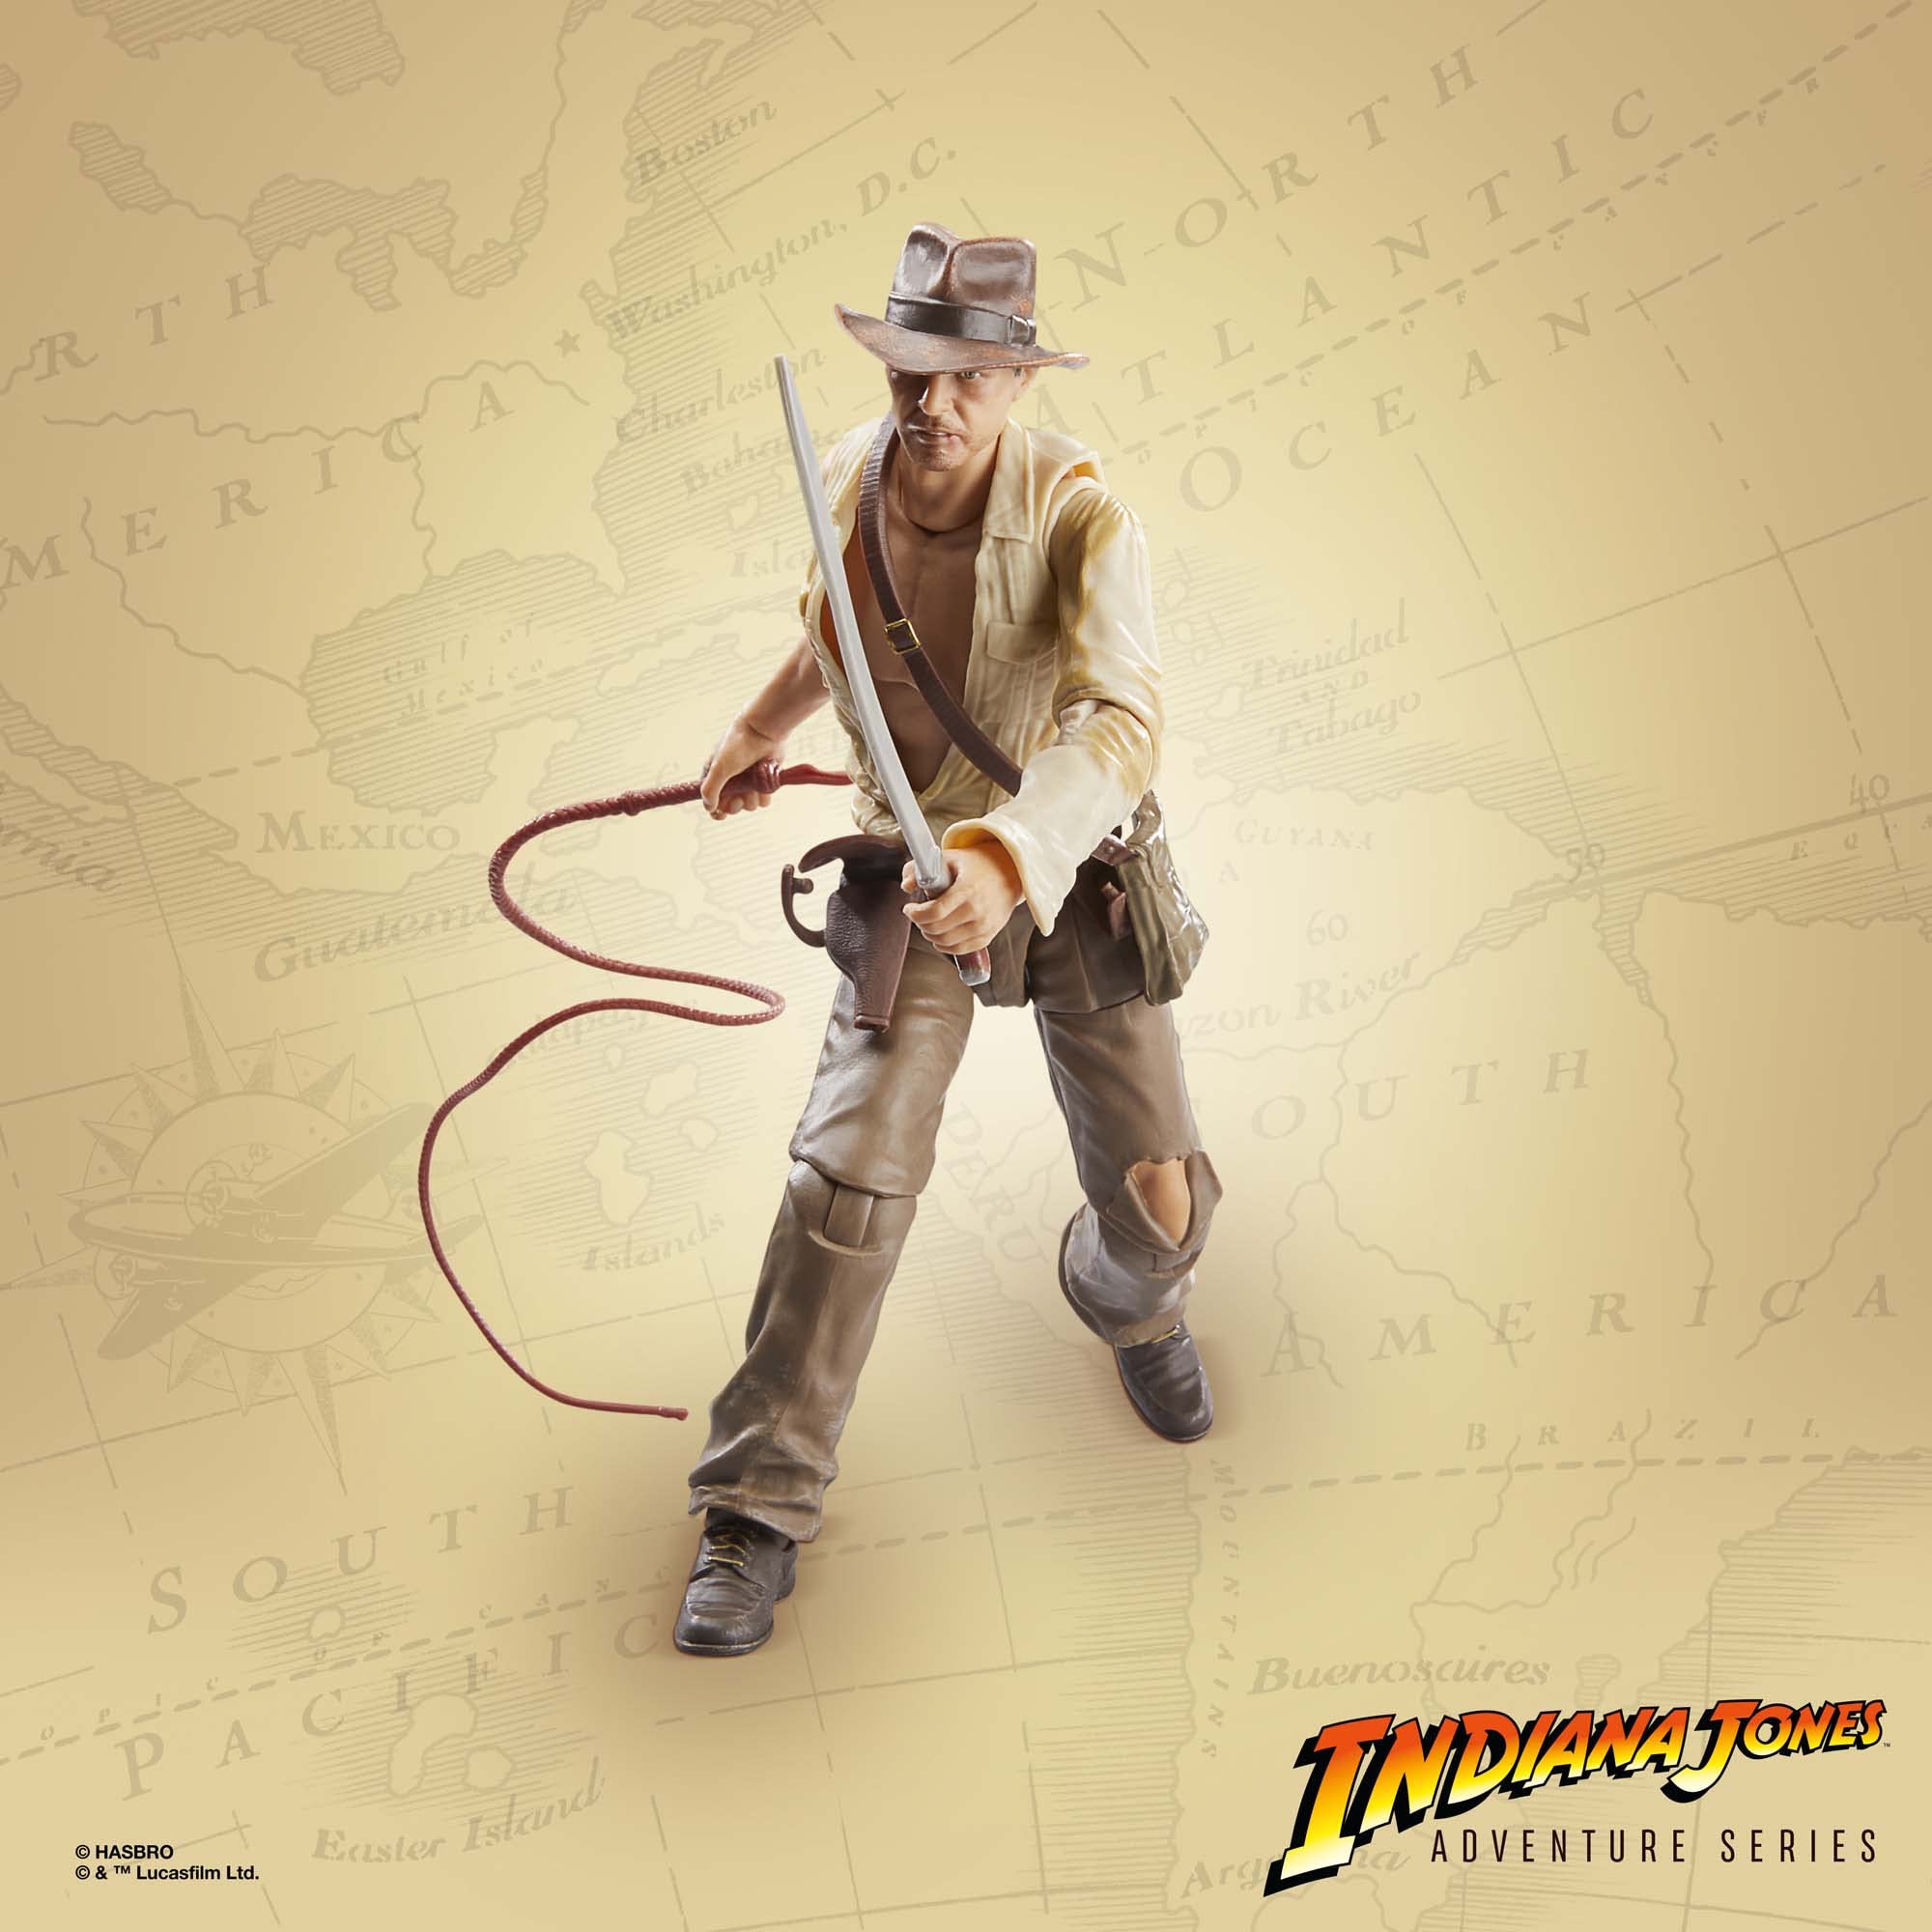 Indiana Jones Hasbro and The Temple of Doom Adventure Series (Temple of Doom) Action Figure,6-inch,Toys for Kids Ages 4 and Up